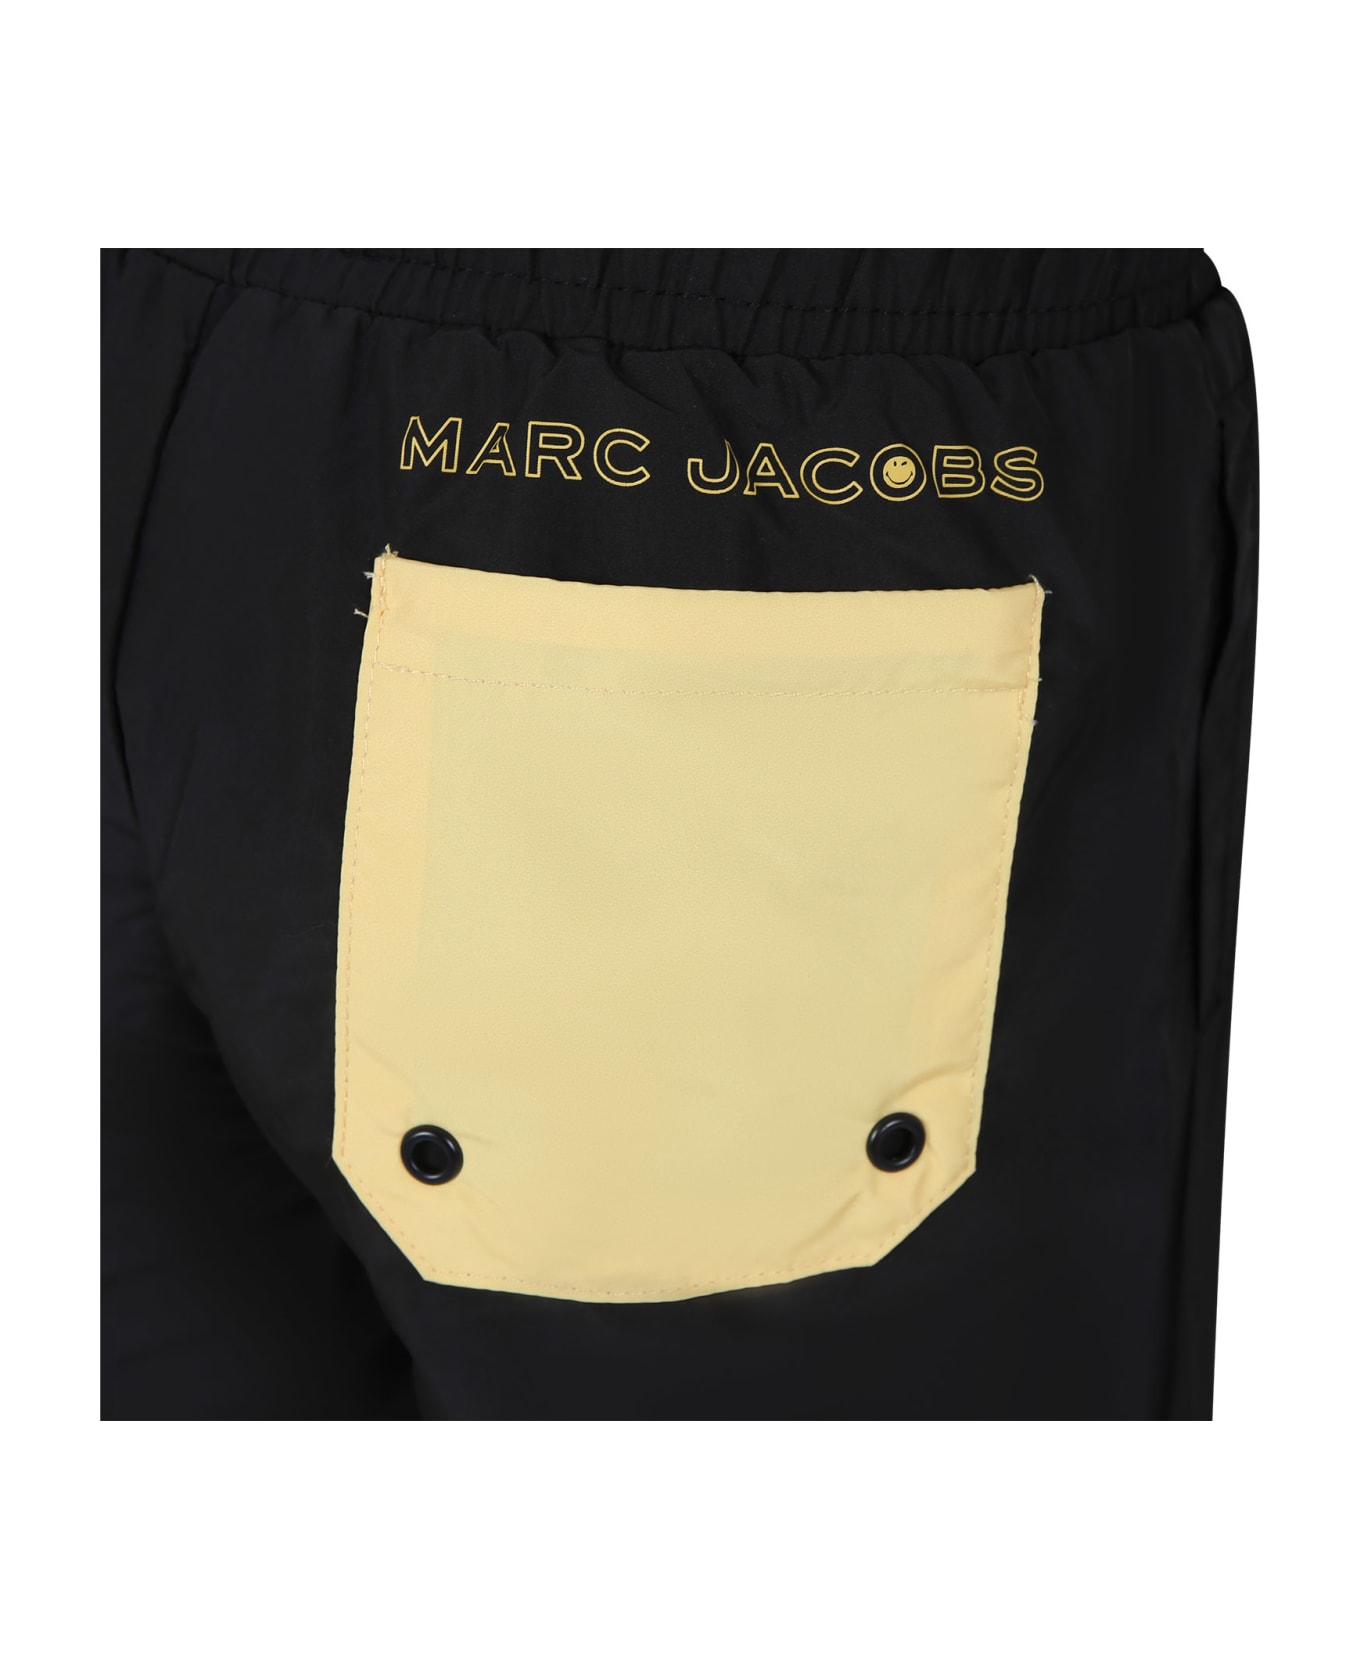 Marc Jacobs Black Swim Shorts For Boy With Smile - Nero